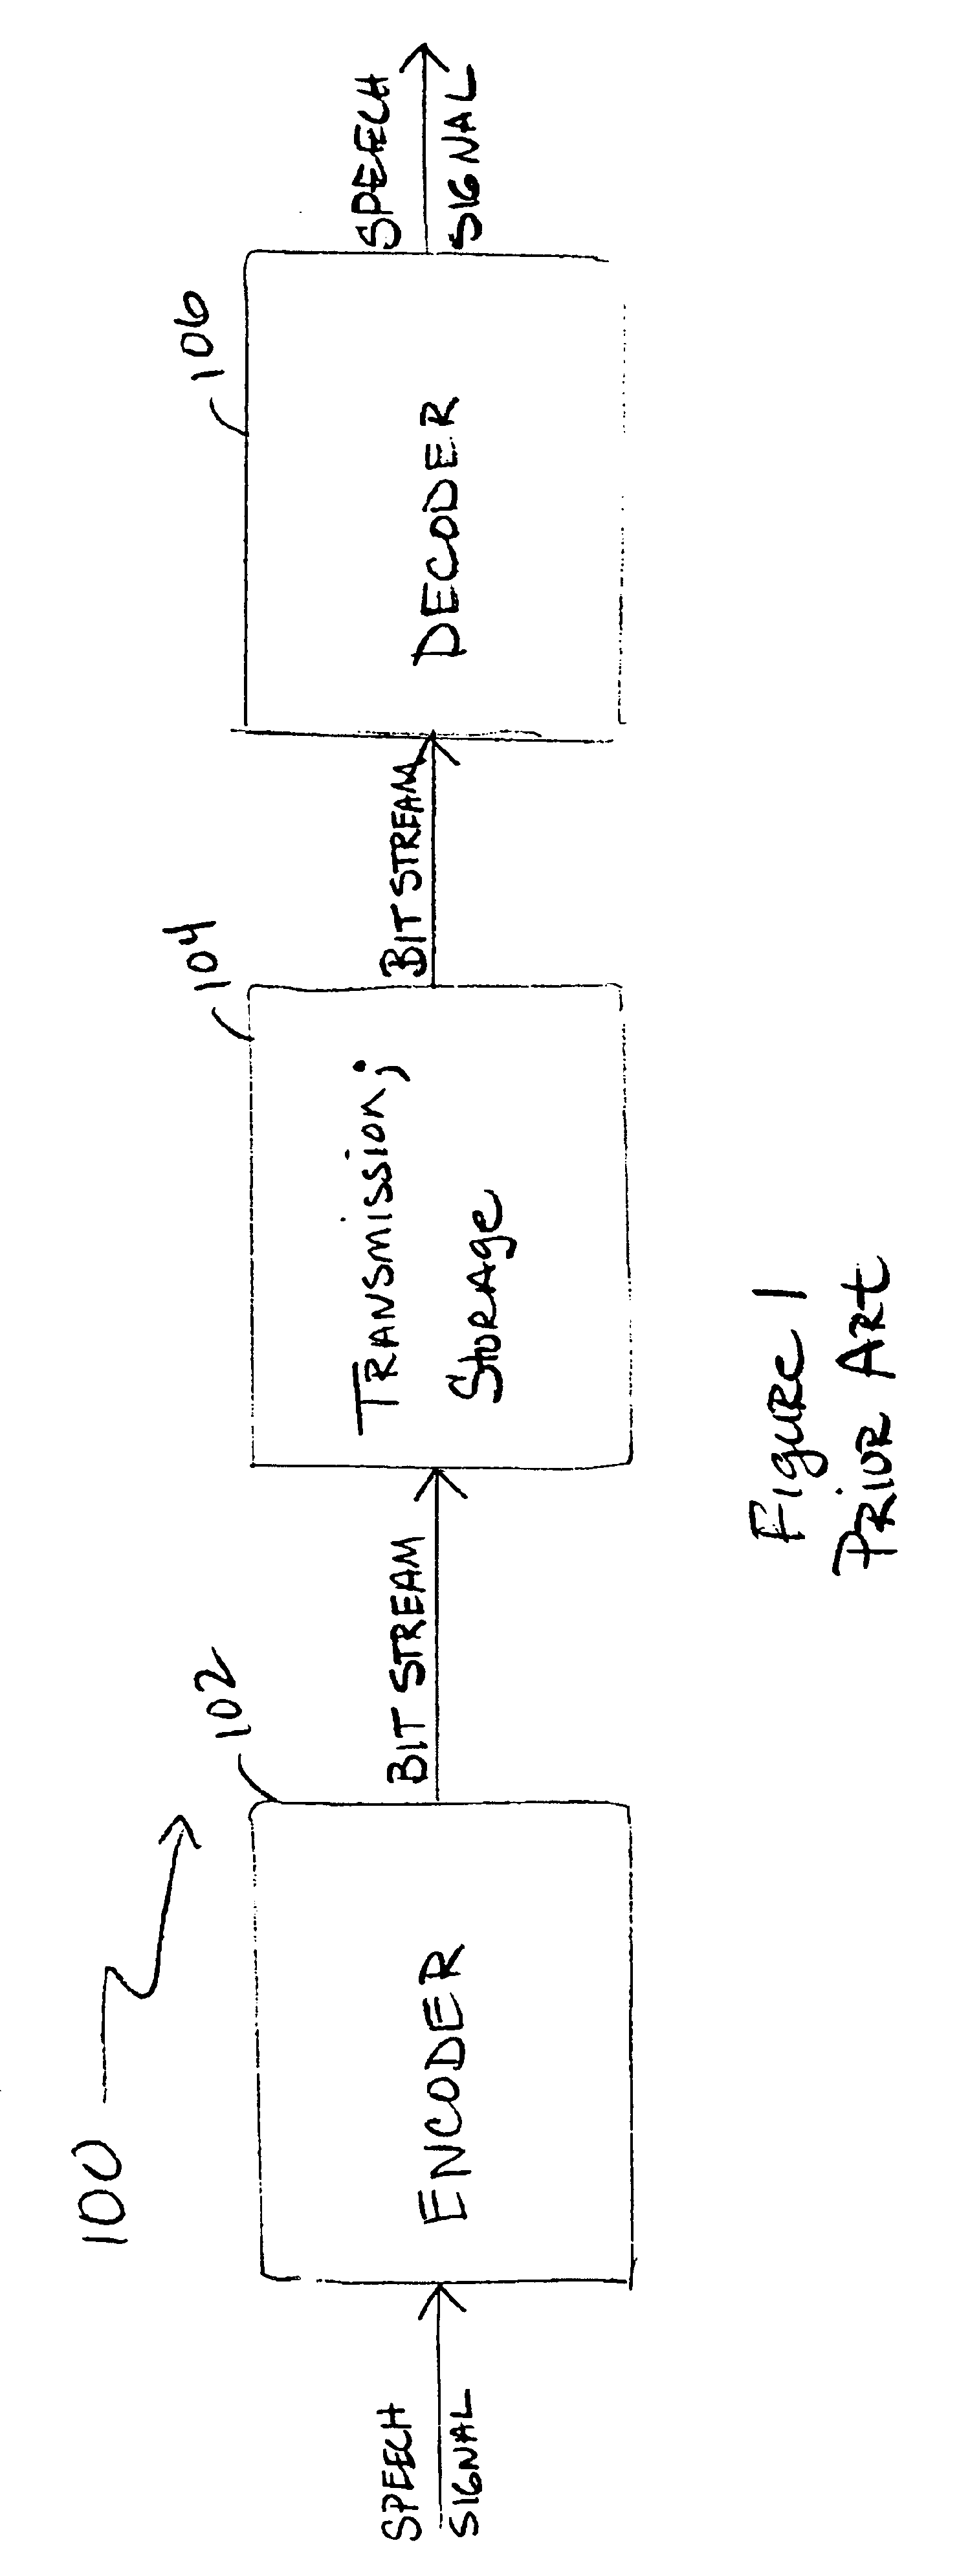 Method for robust classification in speech coding